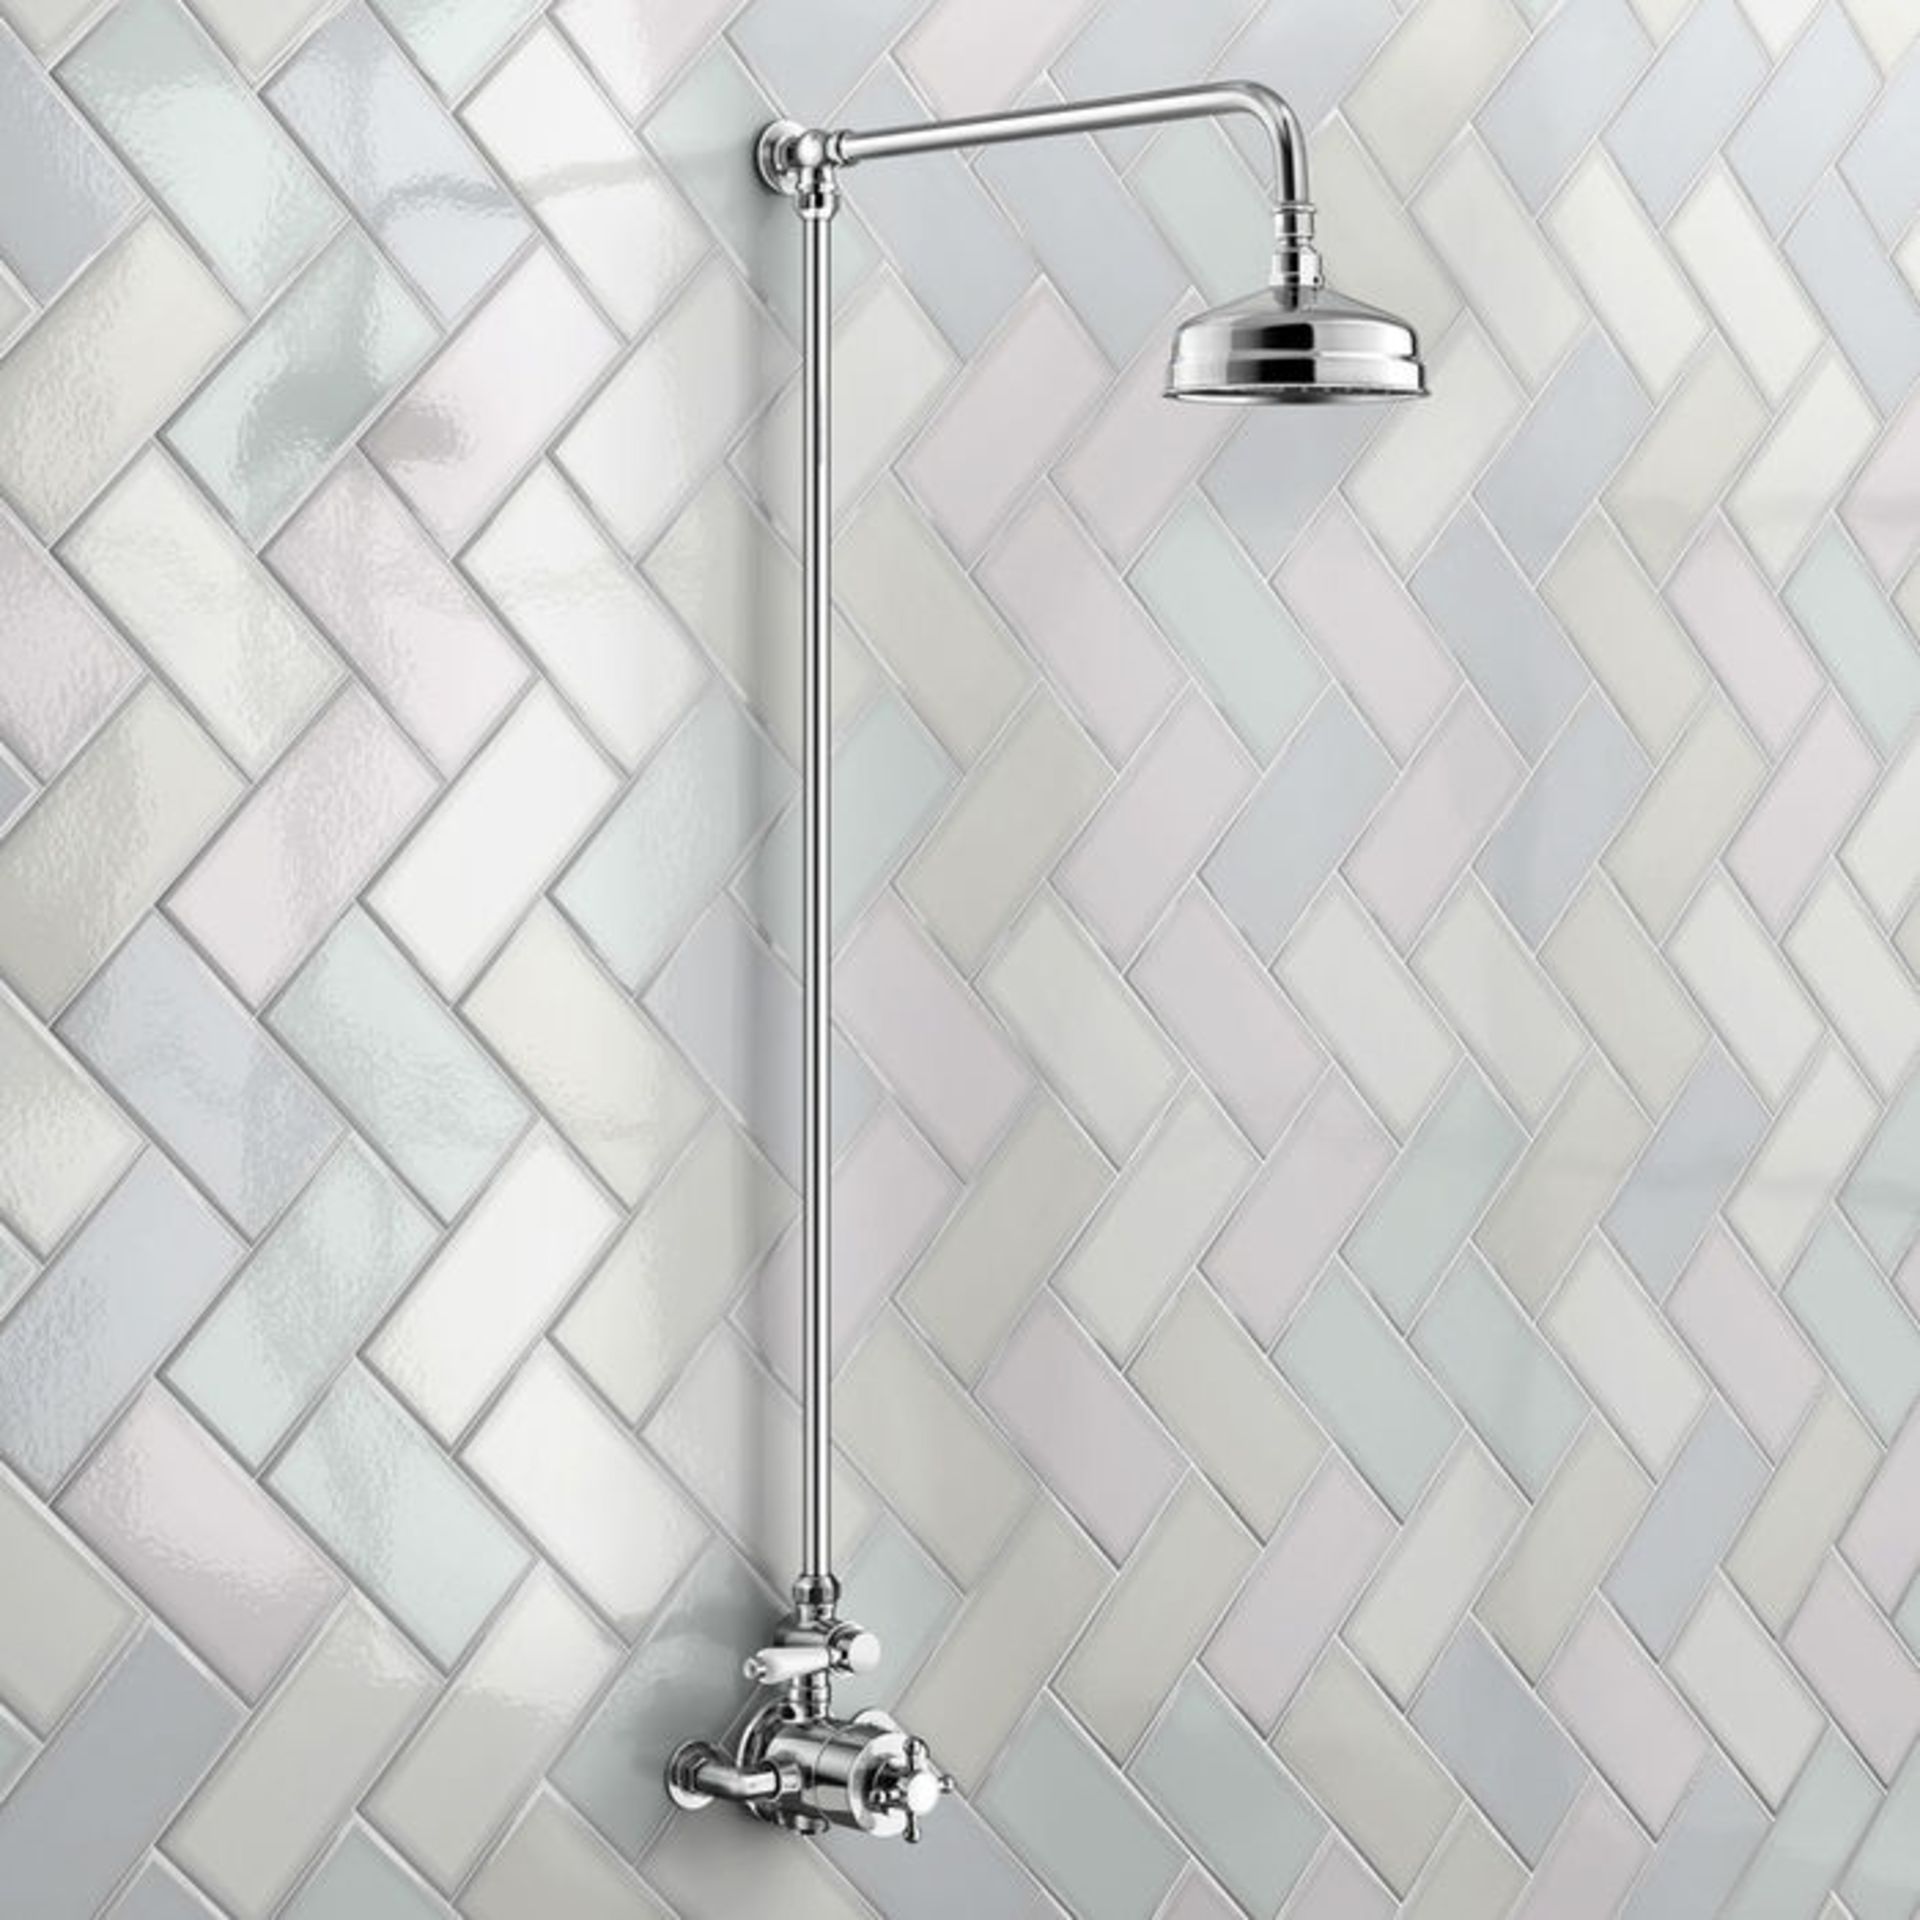 (YC63) Traditional Exposed Thermostatic Shower Kit & Medium Head. Traditional exposed valve - Image 3 of 3